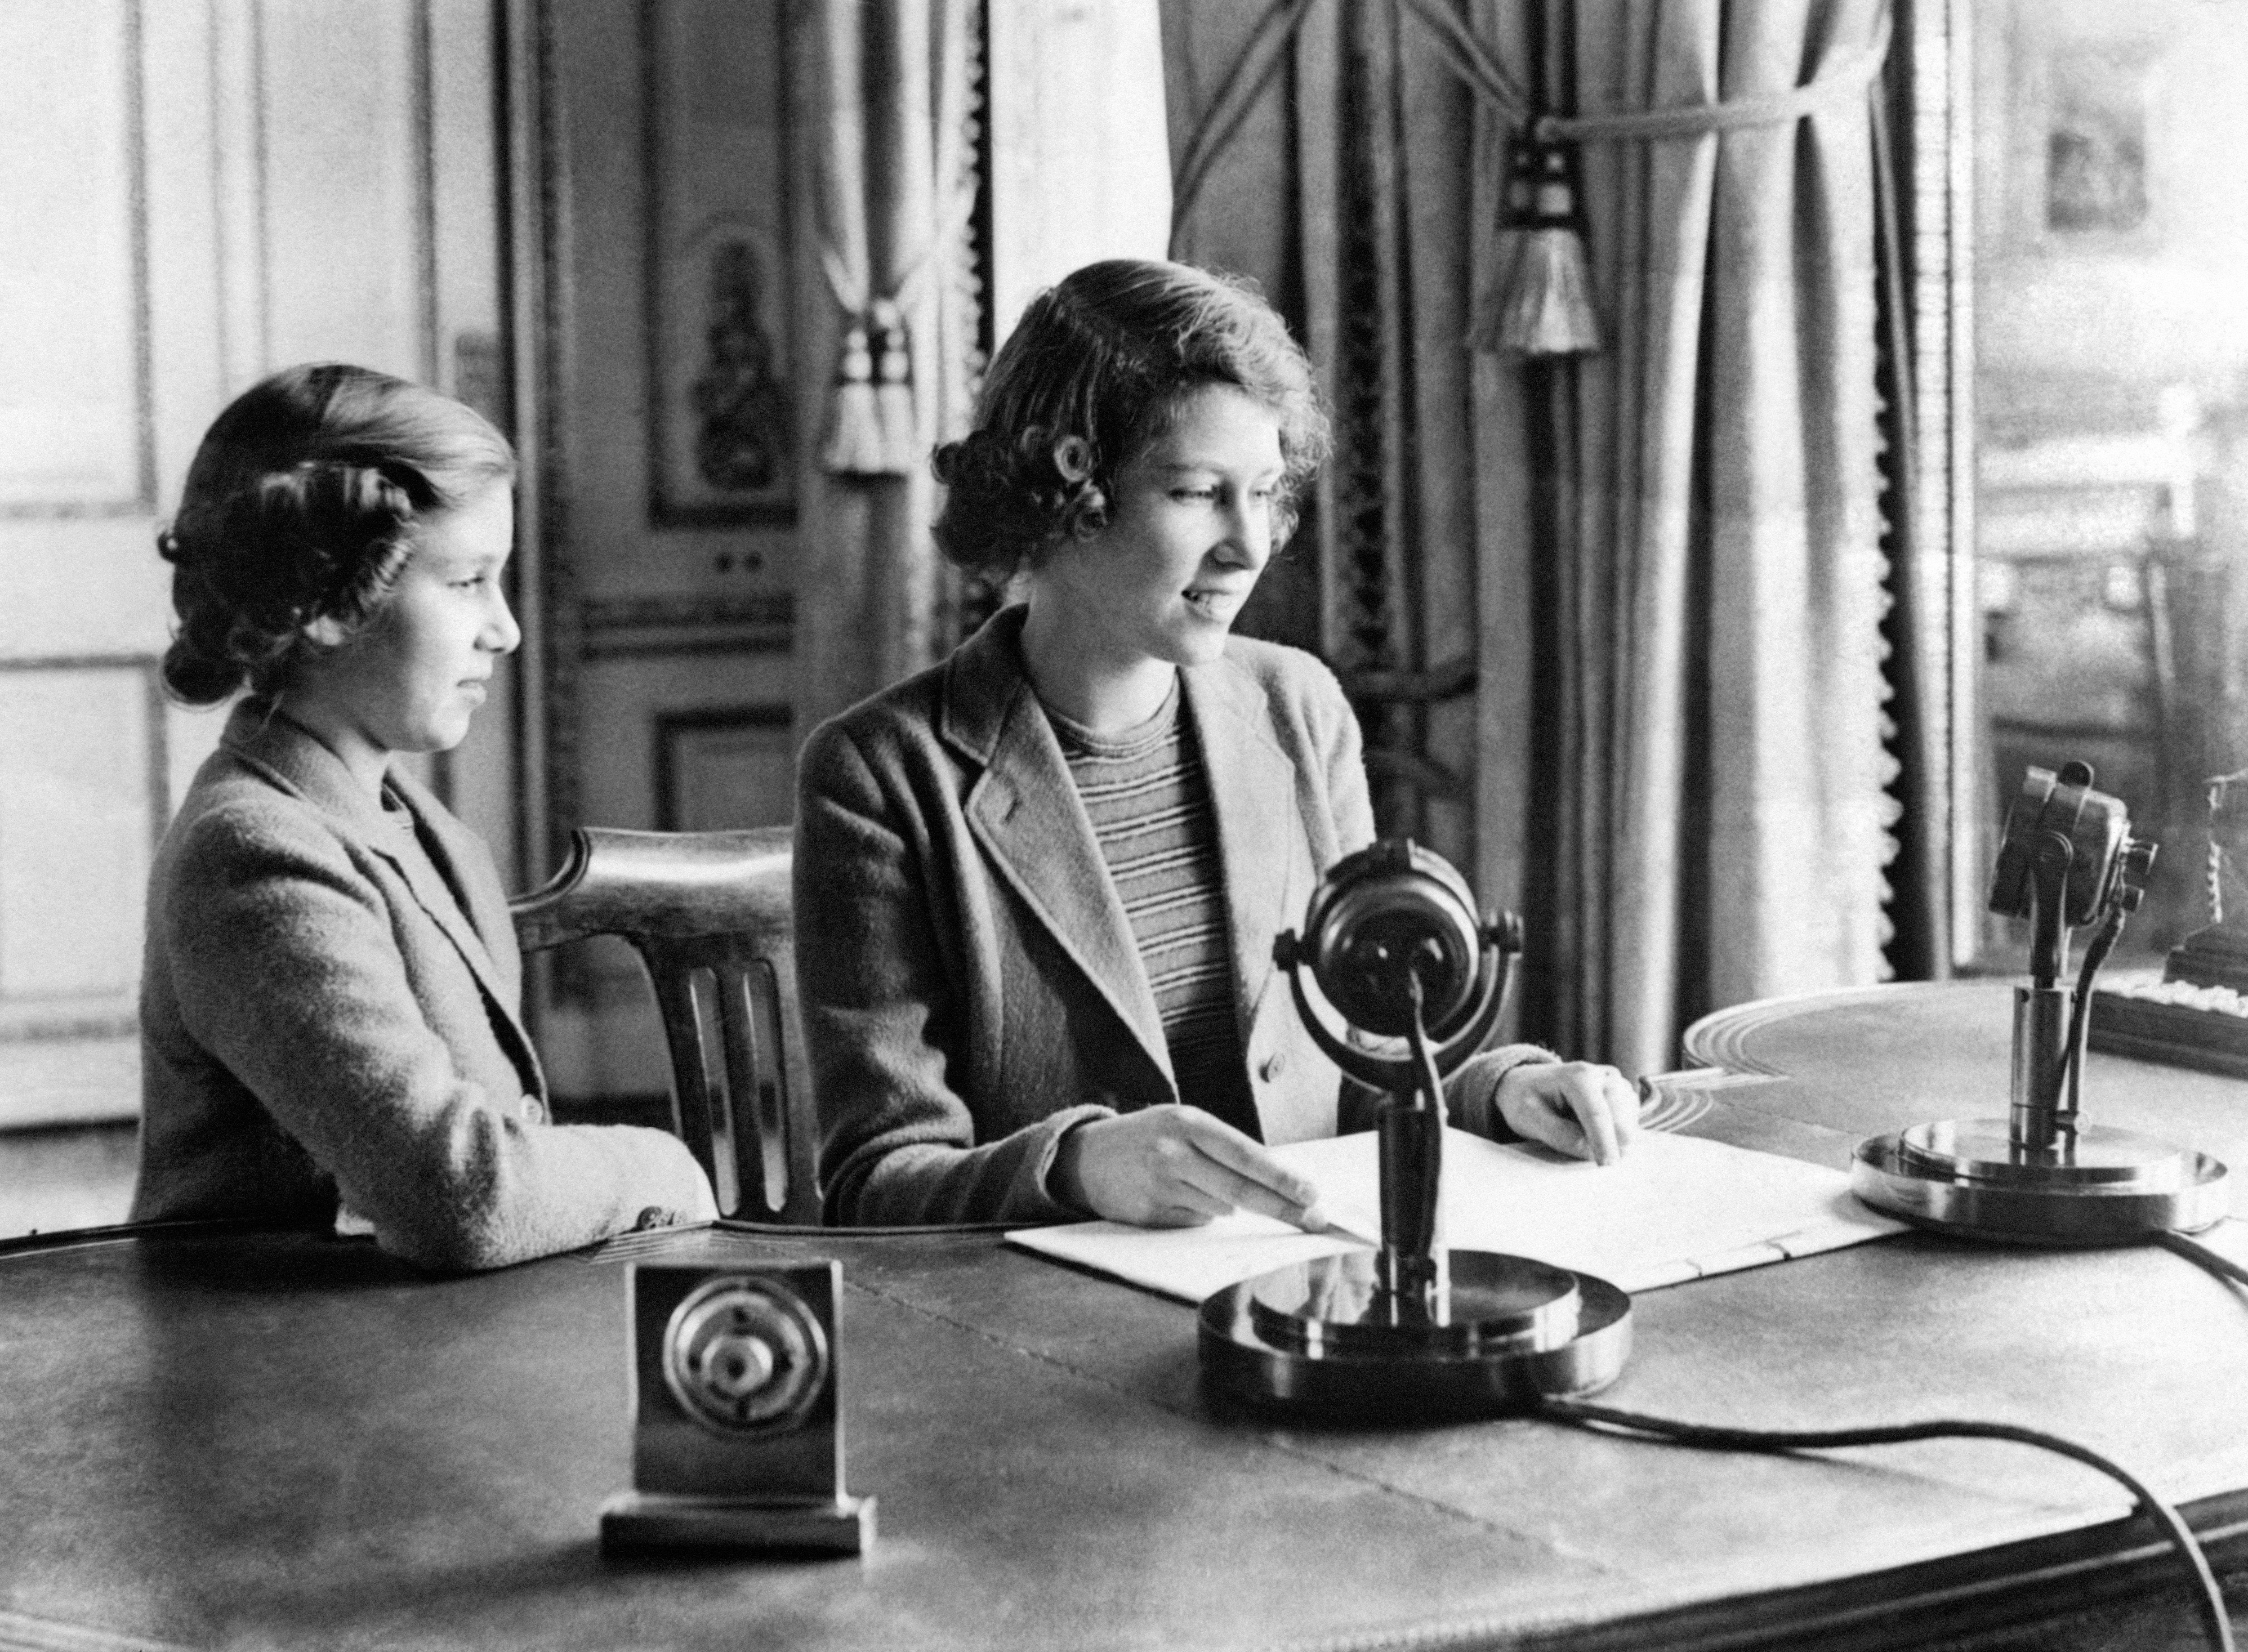 A wartime picture of Princess Elizabeth (right) and Princess Margaret after they broadcast on “Children’s Hour” from Buckingham Palace (PA)